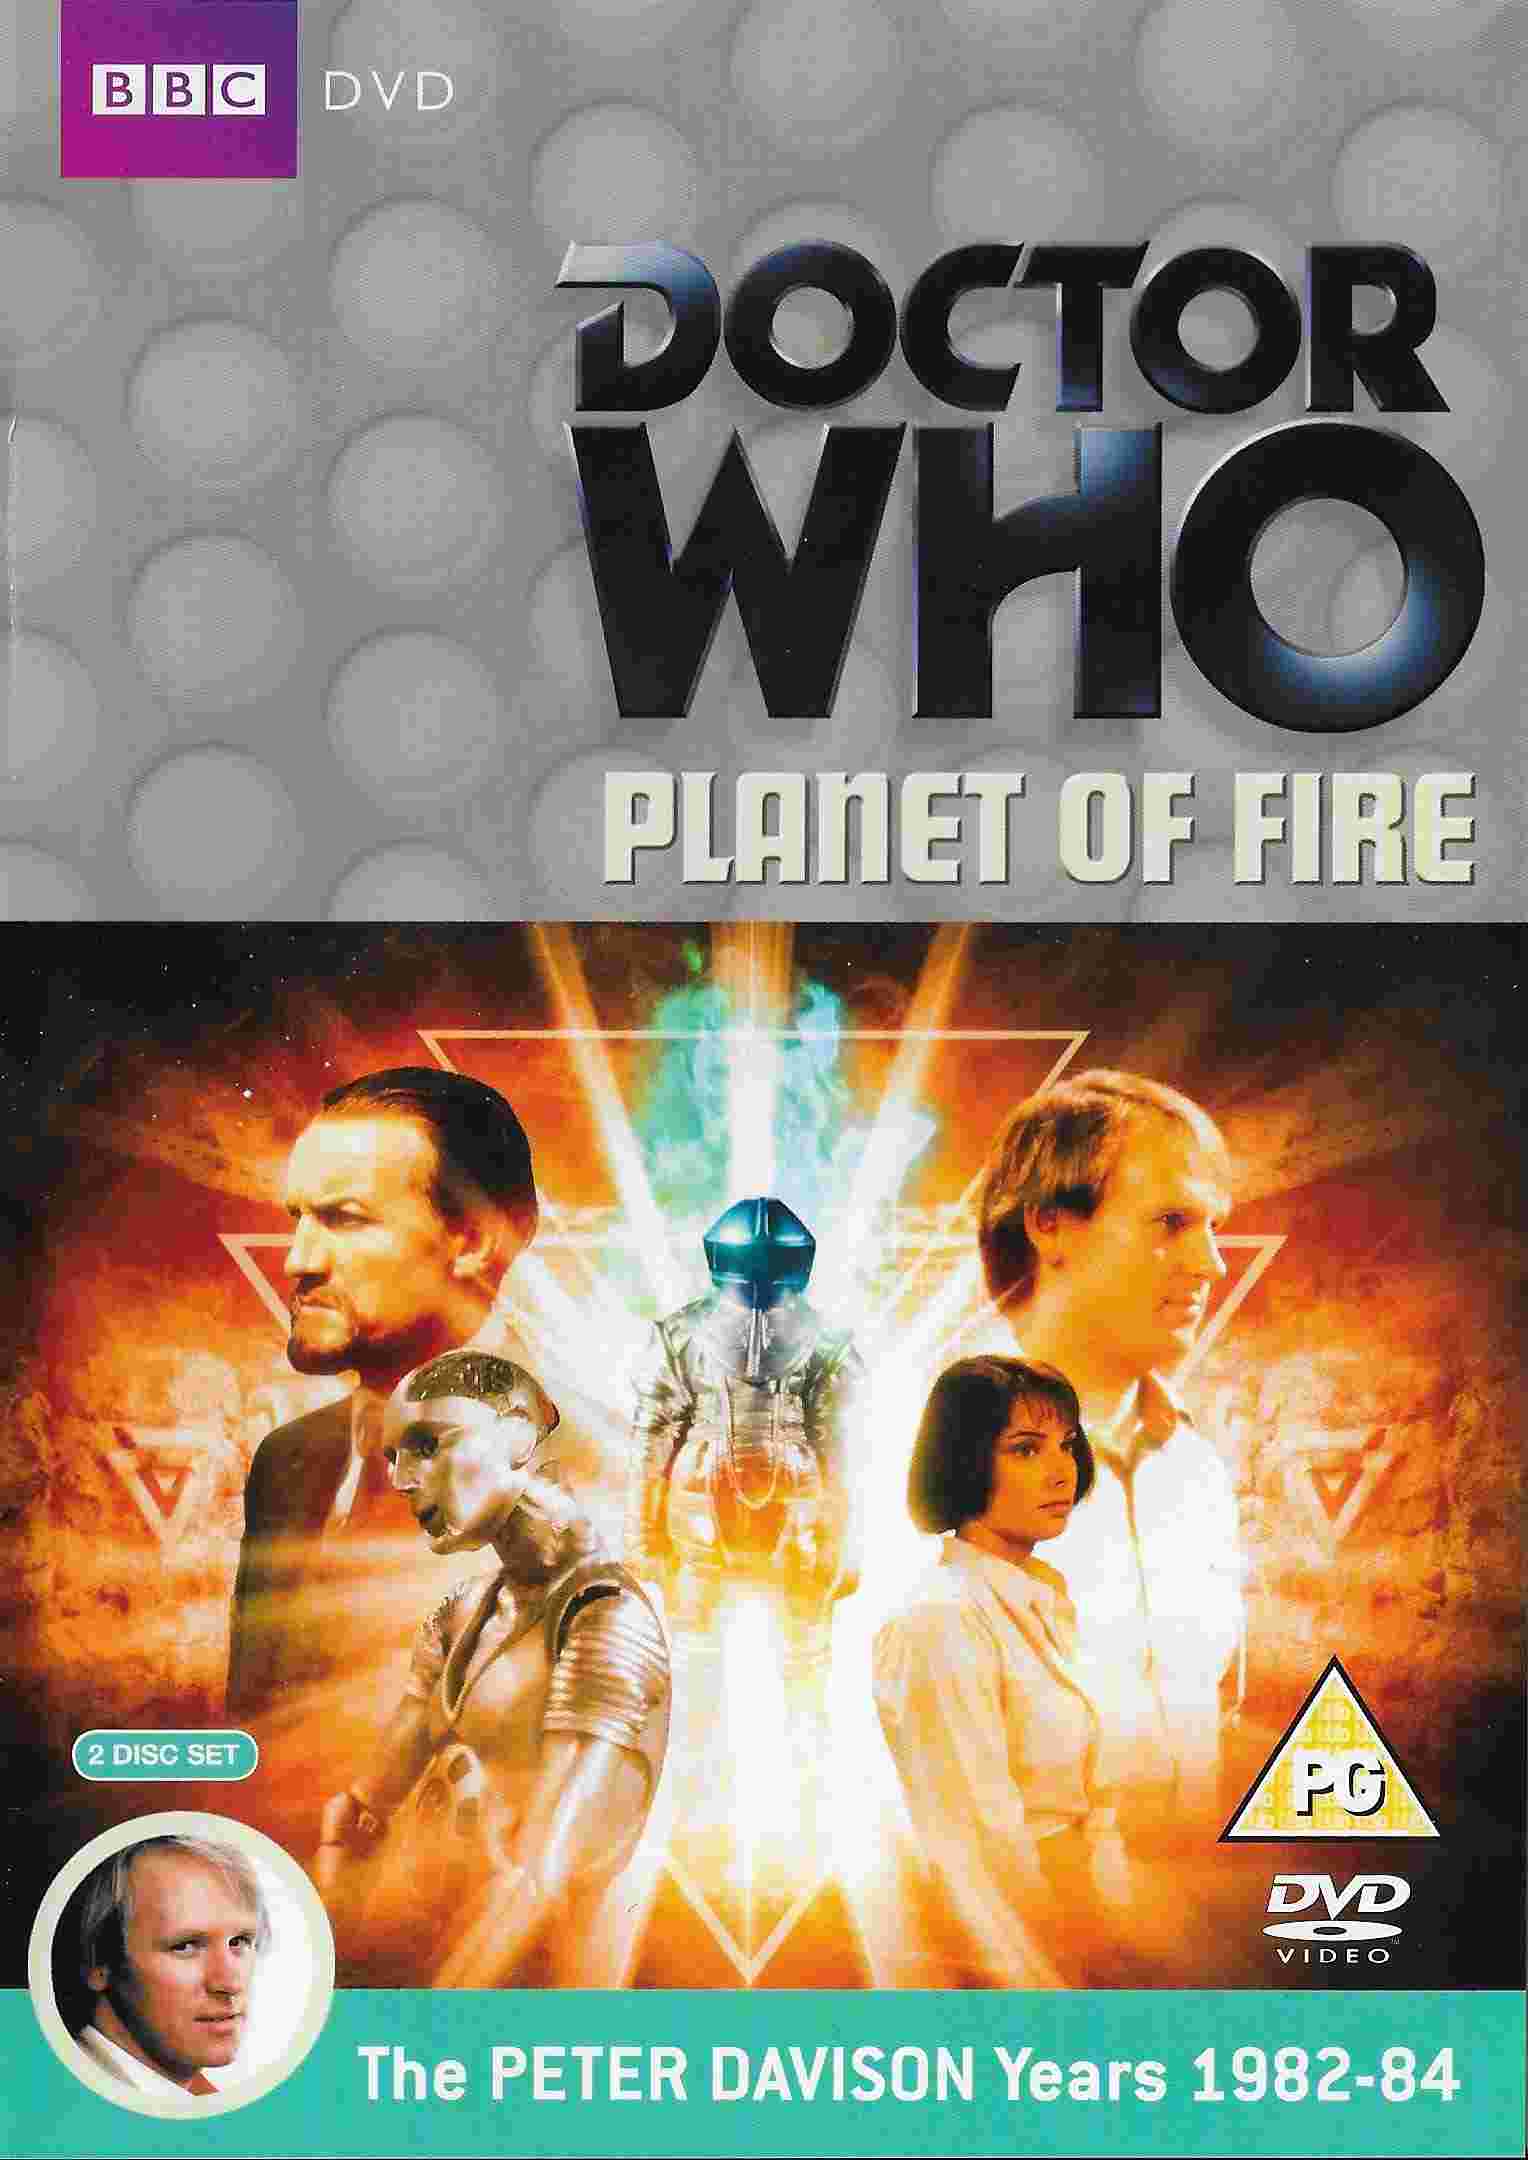 Picture of BBCDVD 2738B Doctor Who - Planet of fire by artist Robert Holmes from the BBC records and Tapes library